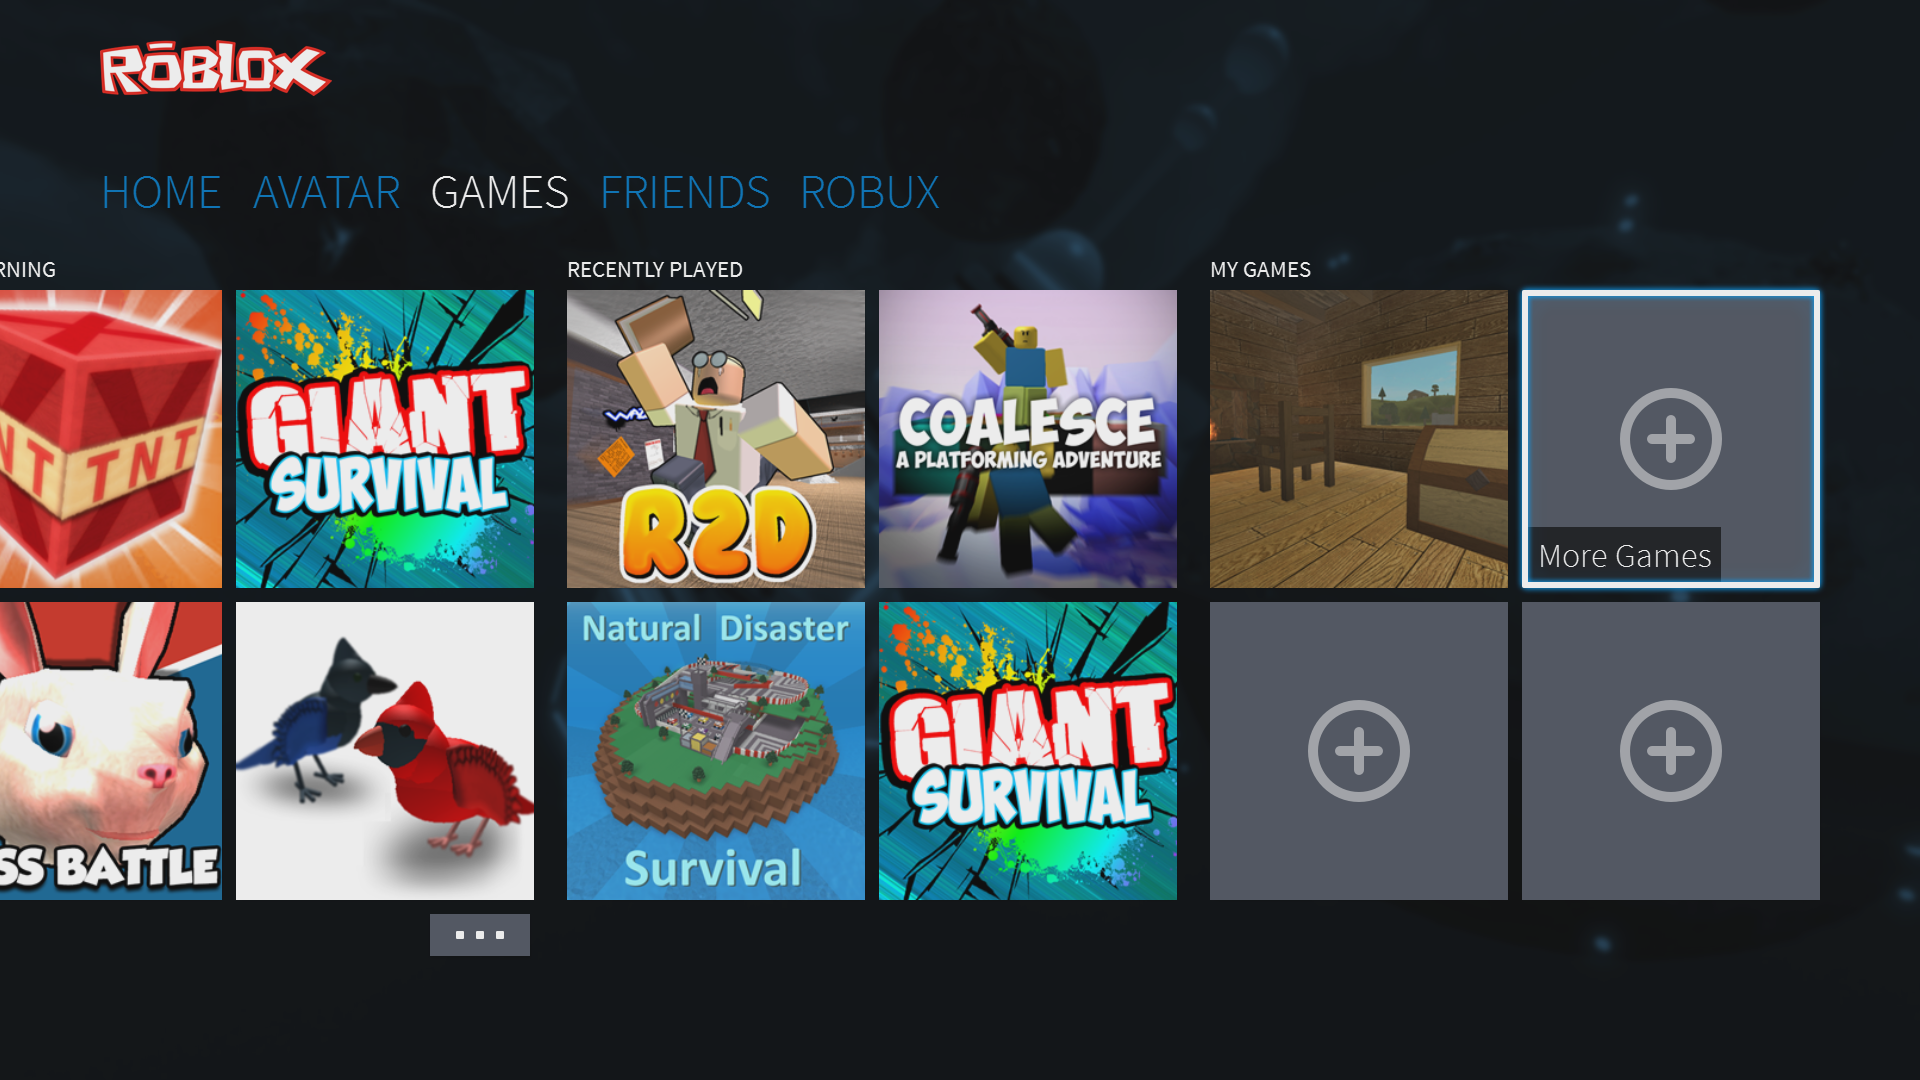 How To Play A Game In Roblox With Friends